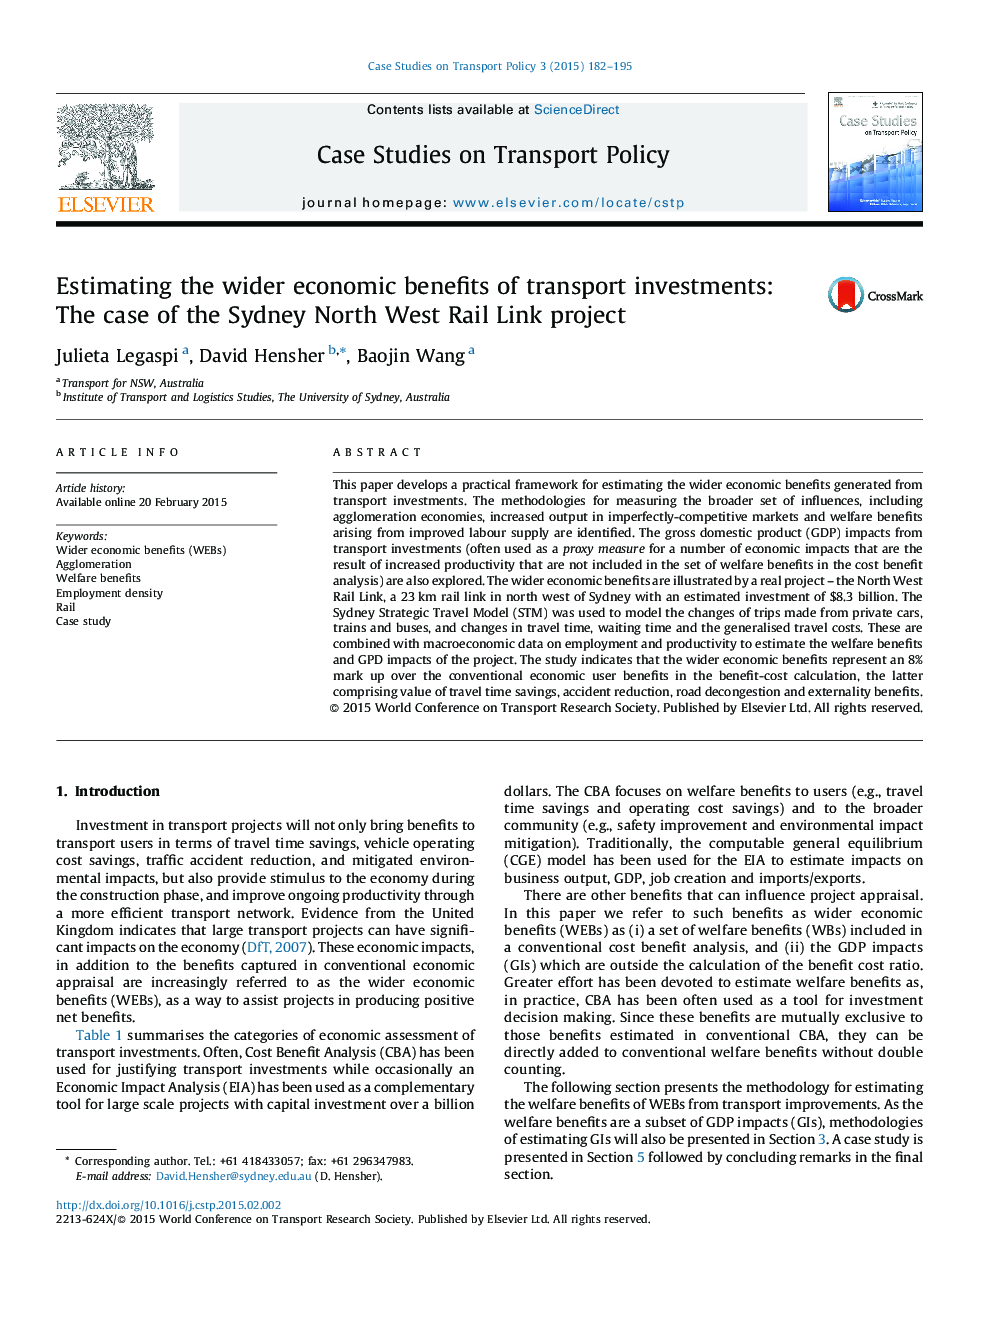 Estimating the wider economic benefits of transport investments: The case of the Sydney North West Rail Link project